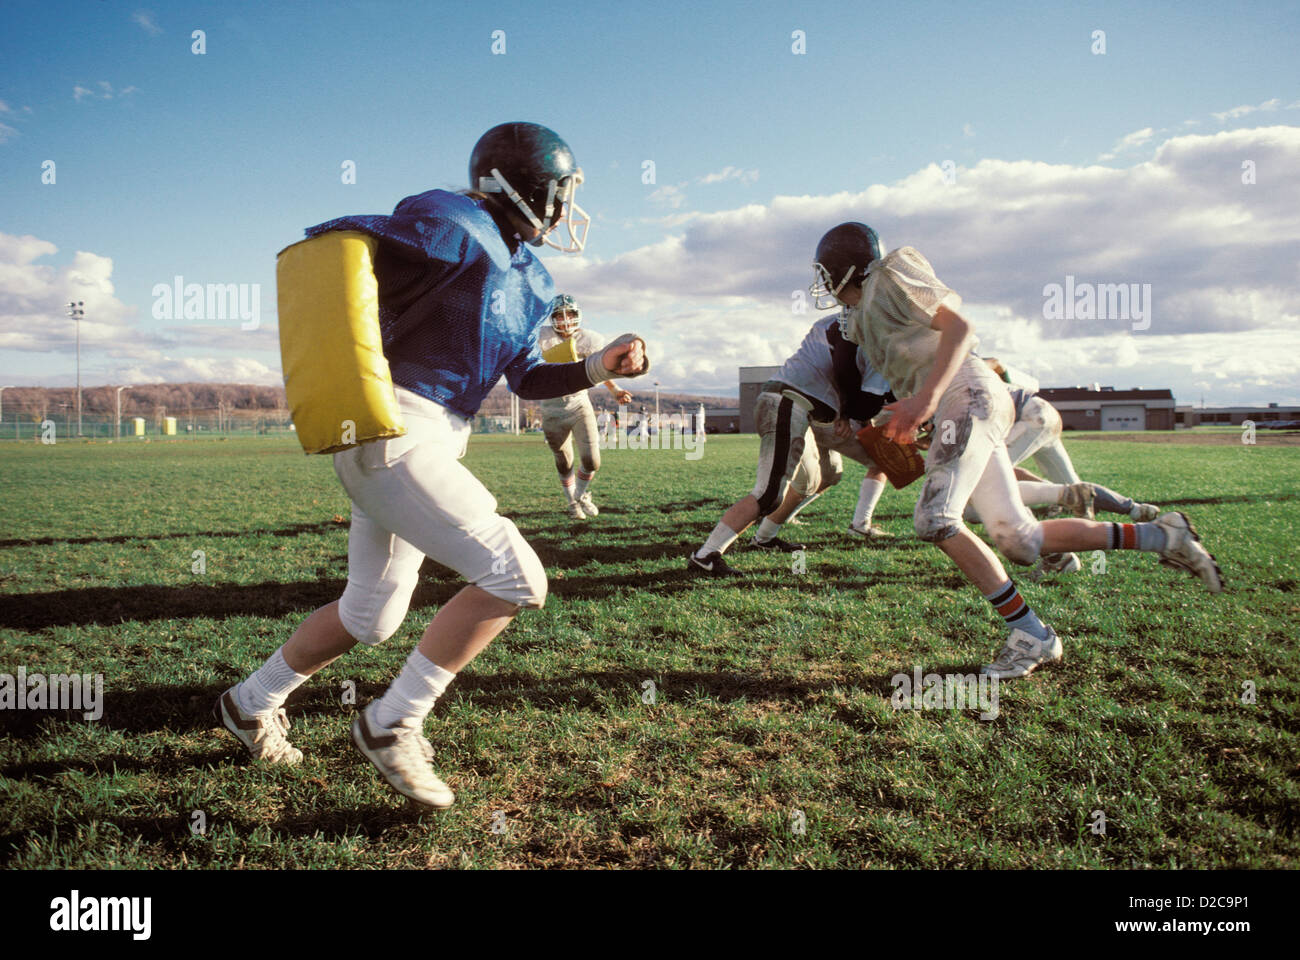 New York, Pioneer Central. Teens Playing Football, With Female Player In Blue Jersey. Stock Photo